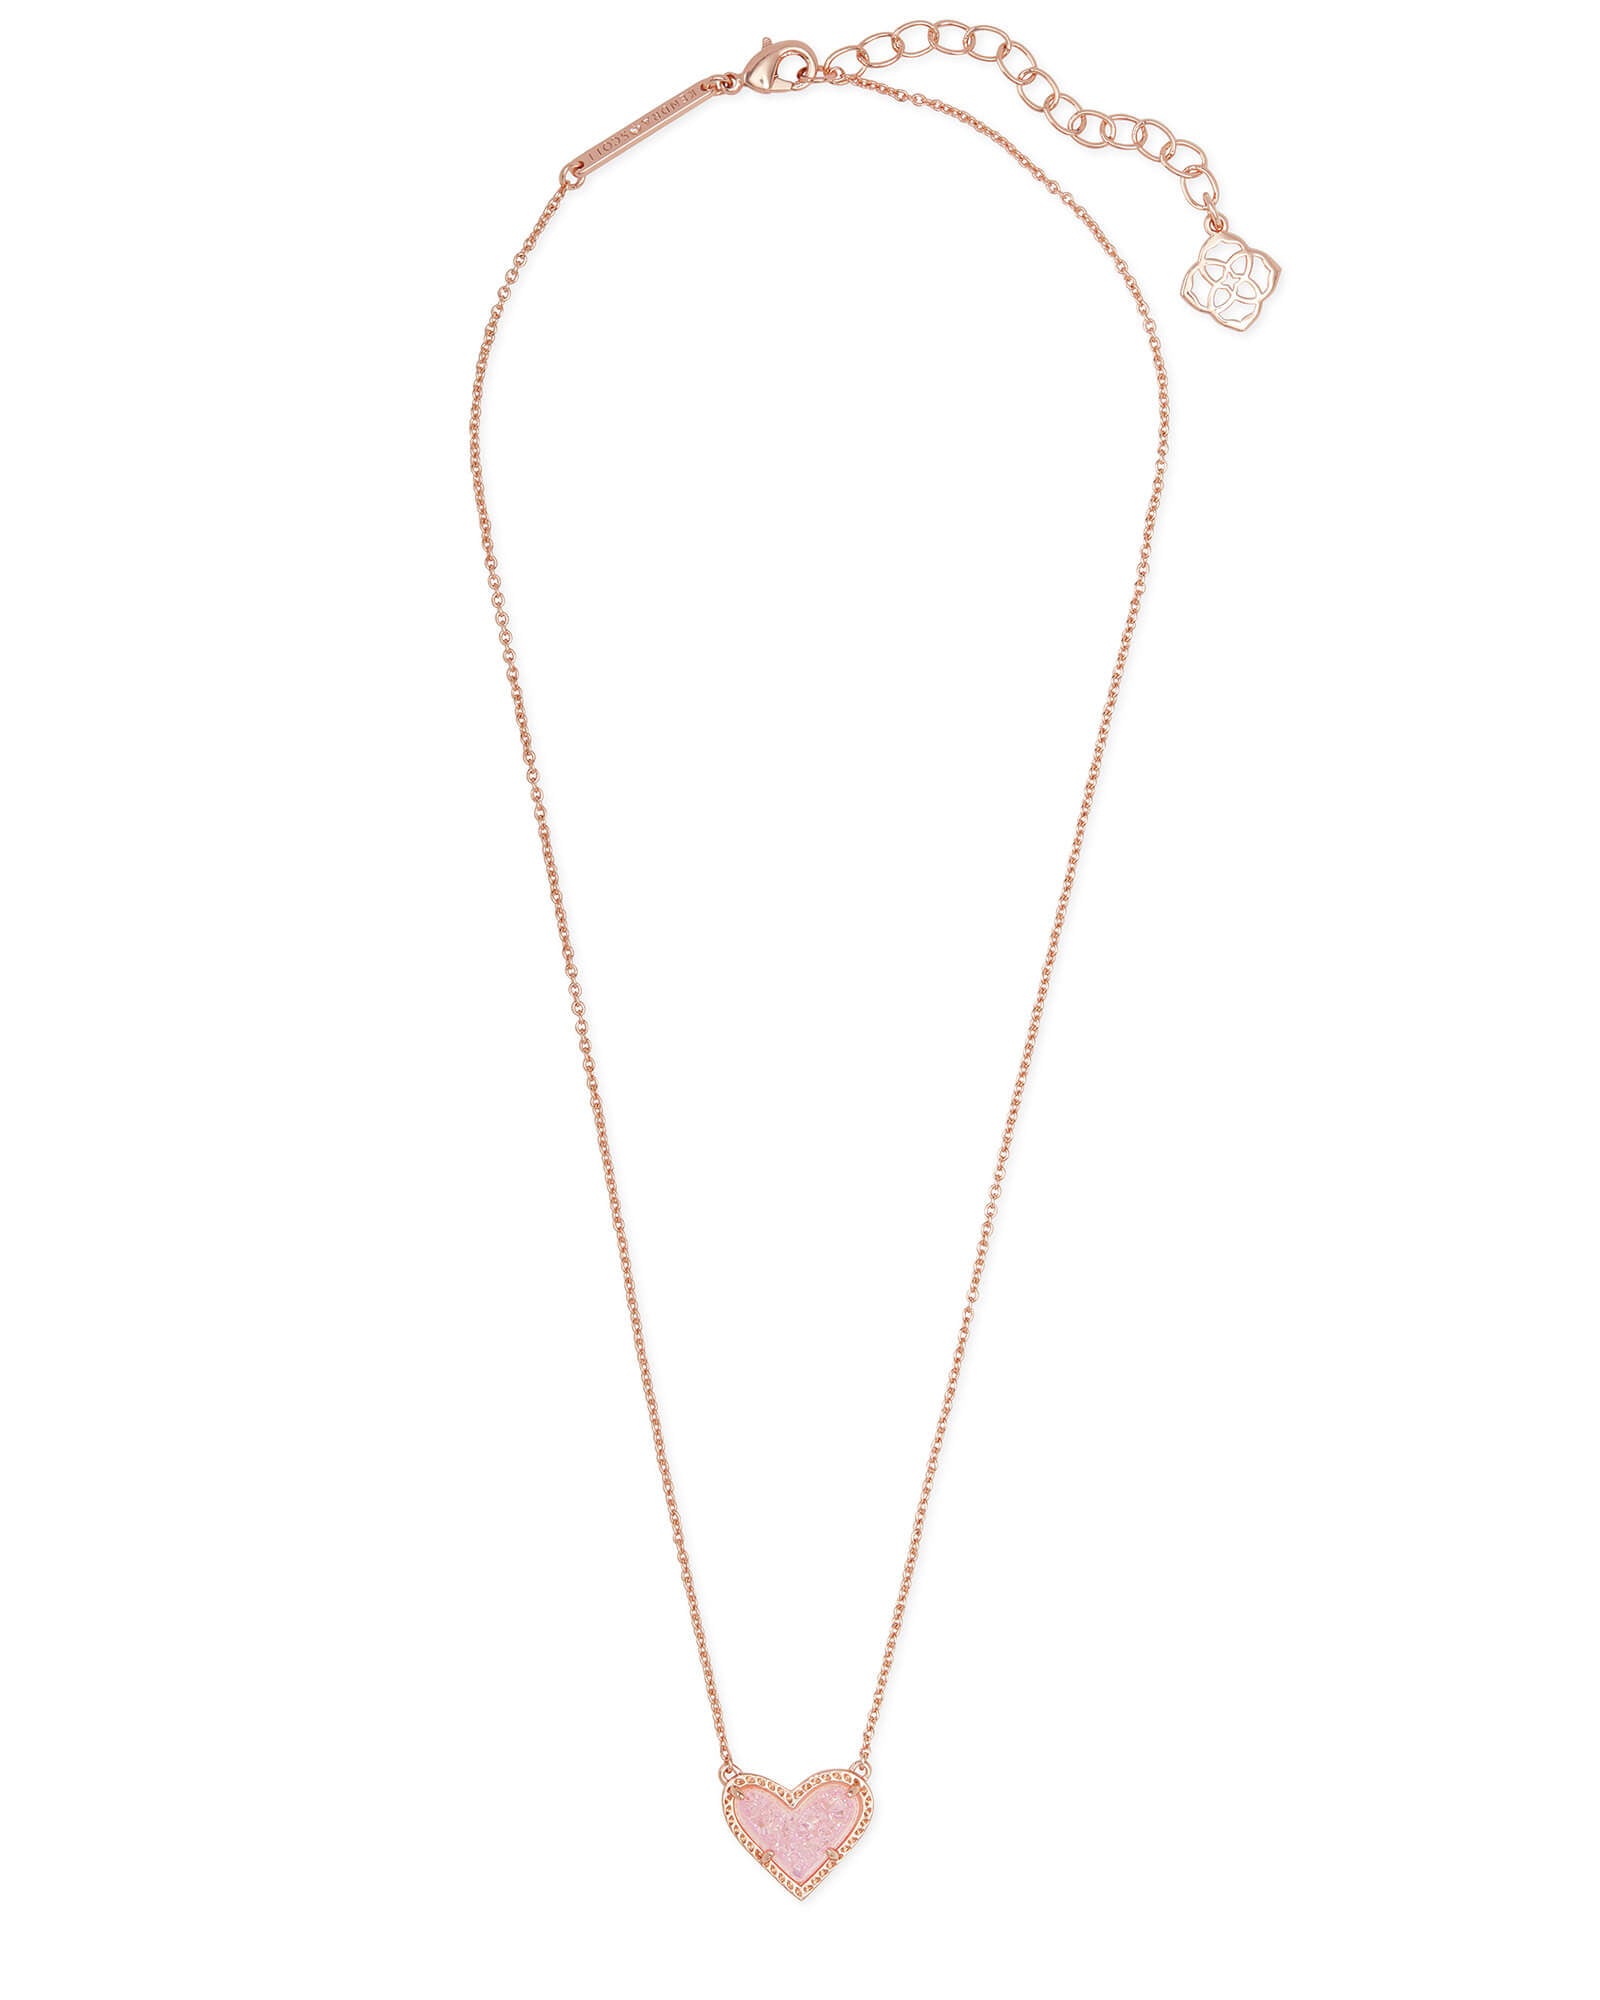 Kendra Scott Ari Heart Pendant Necklace in Pink Drusy and Rose Gold